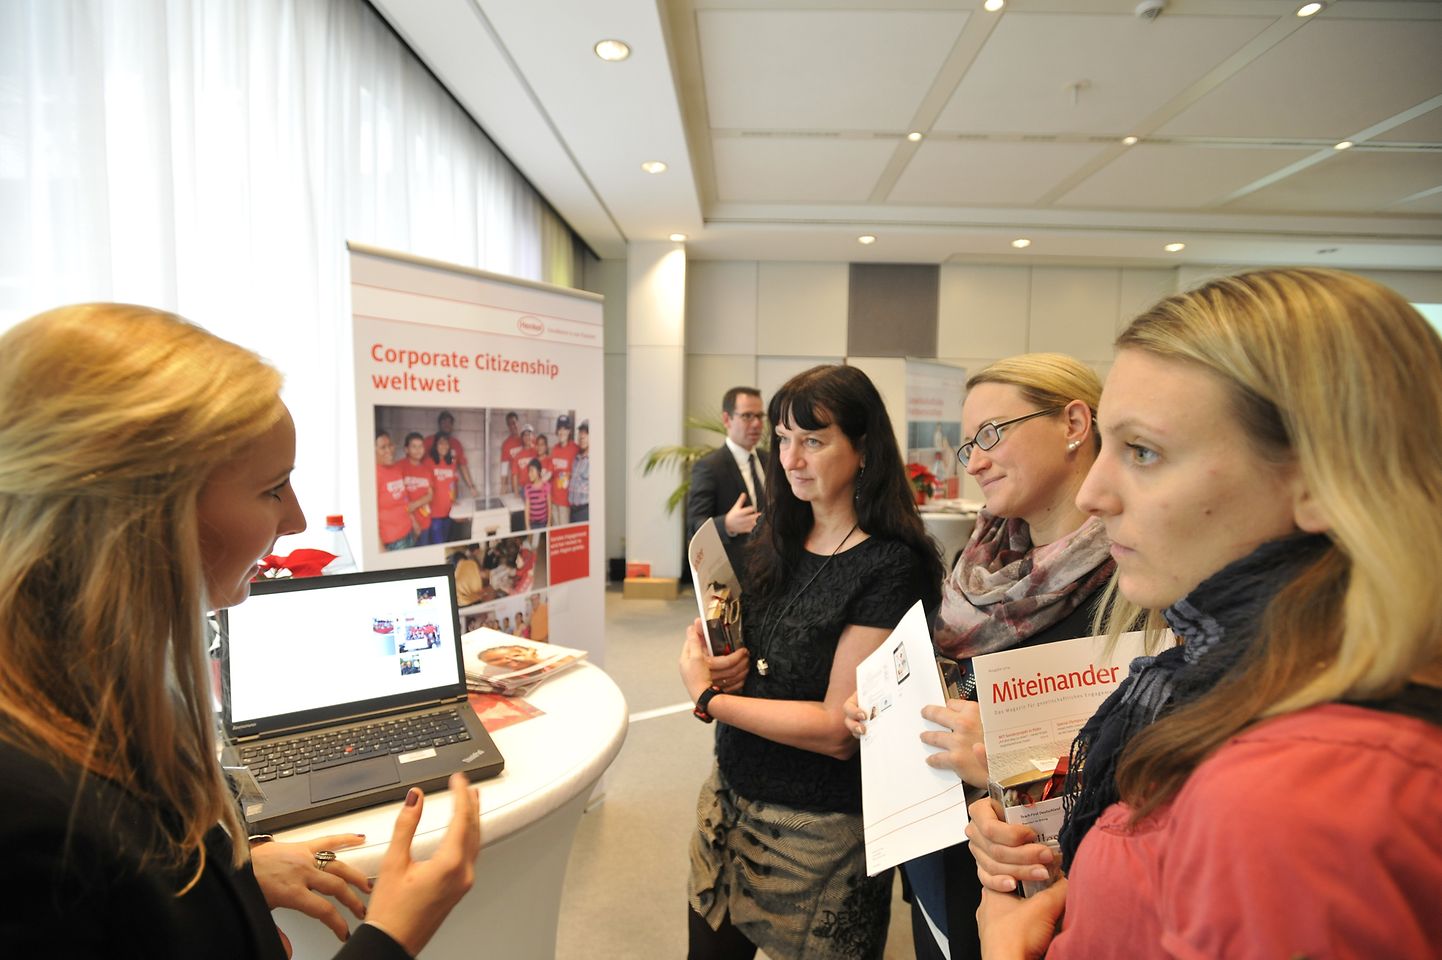 Employees exchanged ideas on volunteering work at the open discussion forum organized by Henkel’s Corporate Citizenship team in Düsseldorf.